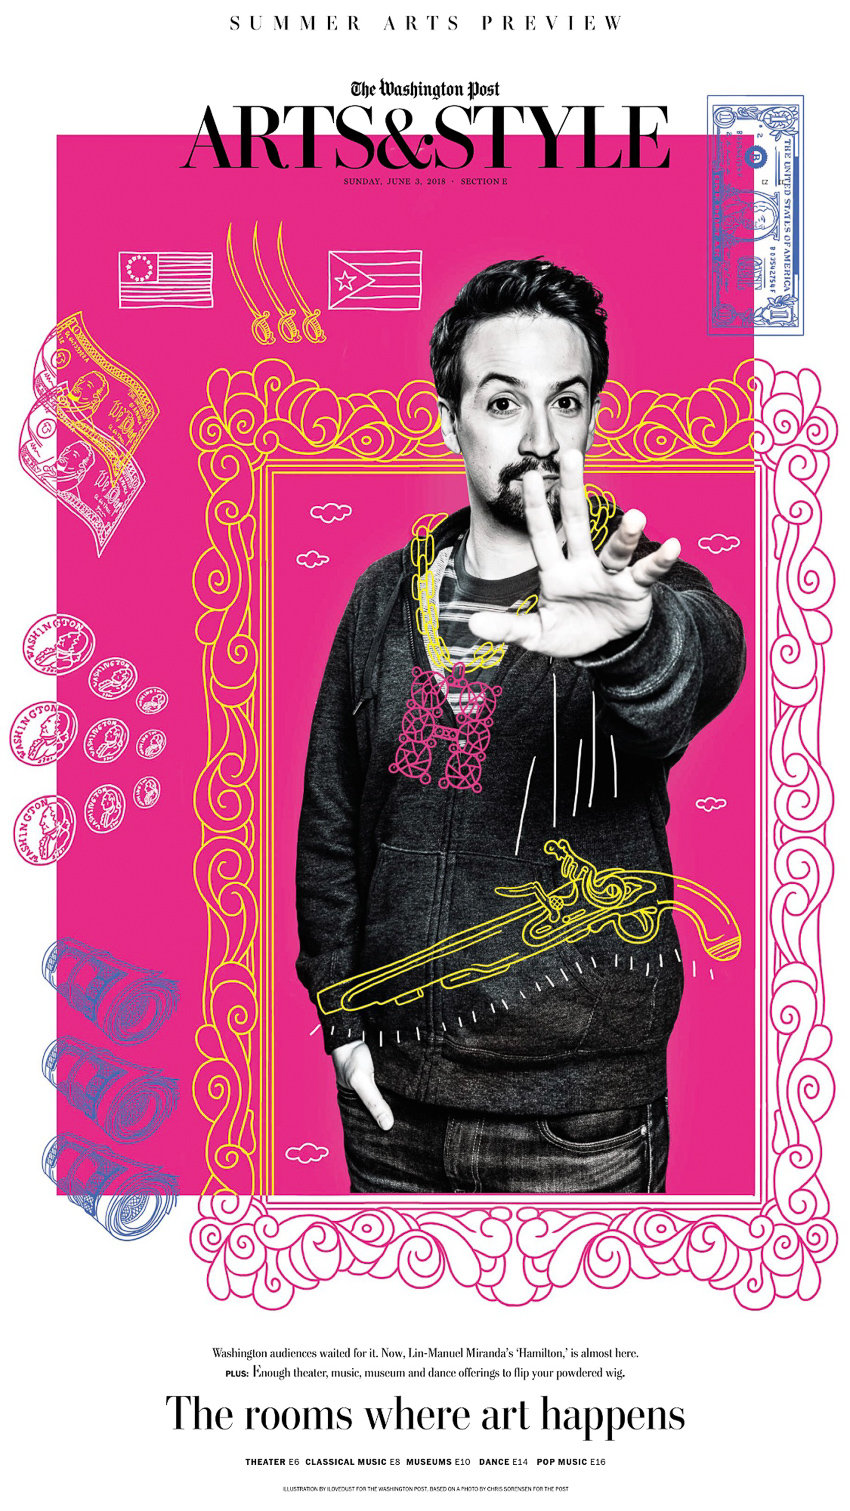 Lin Manuel Miranda on the cover of the Washington Post Summer Arts Preview photographed by Chris Sorensen